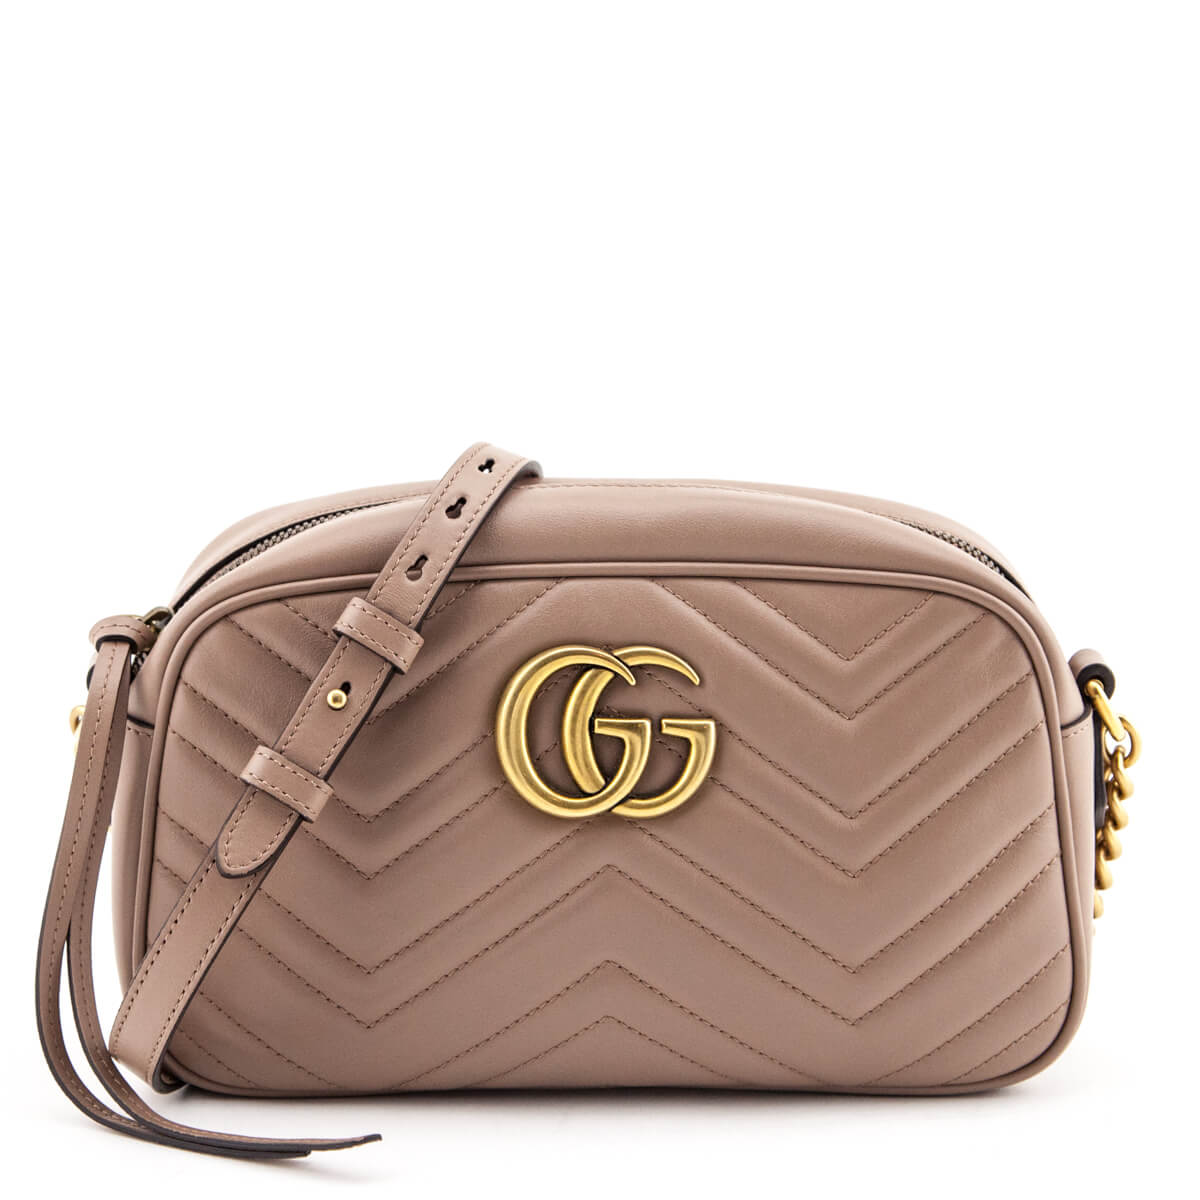 Gucci GG Marmont Small Shoulder Bag Matelassé Leather Dusty Pink